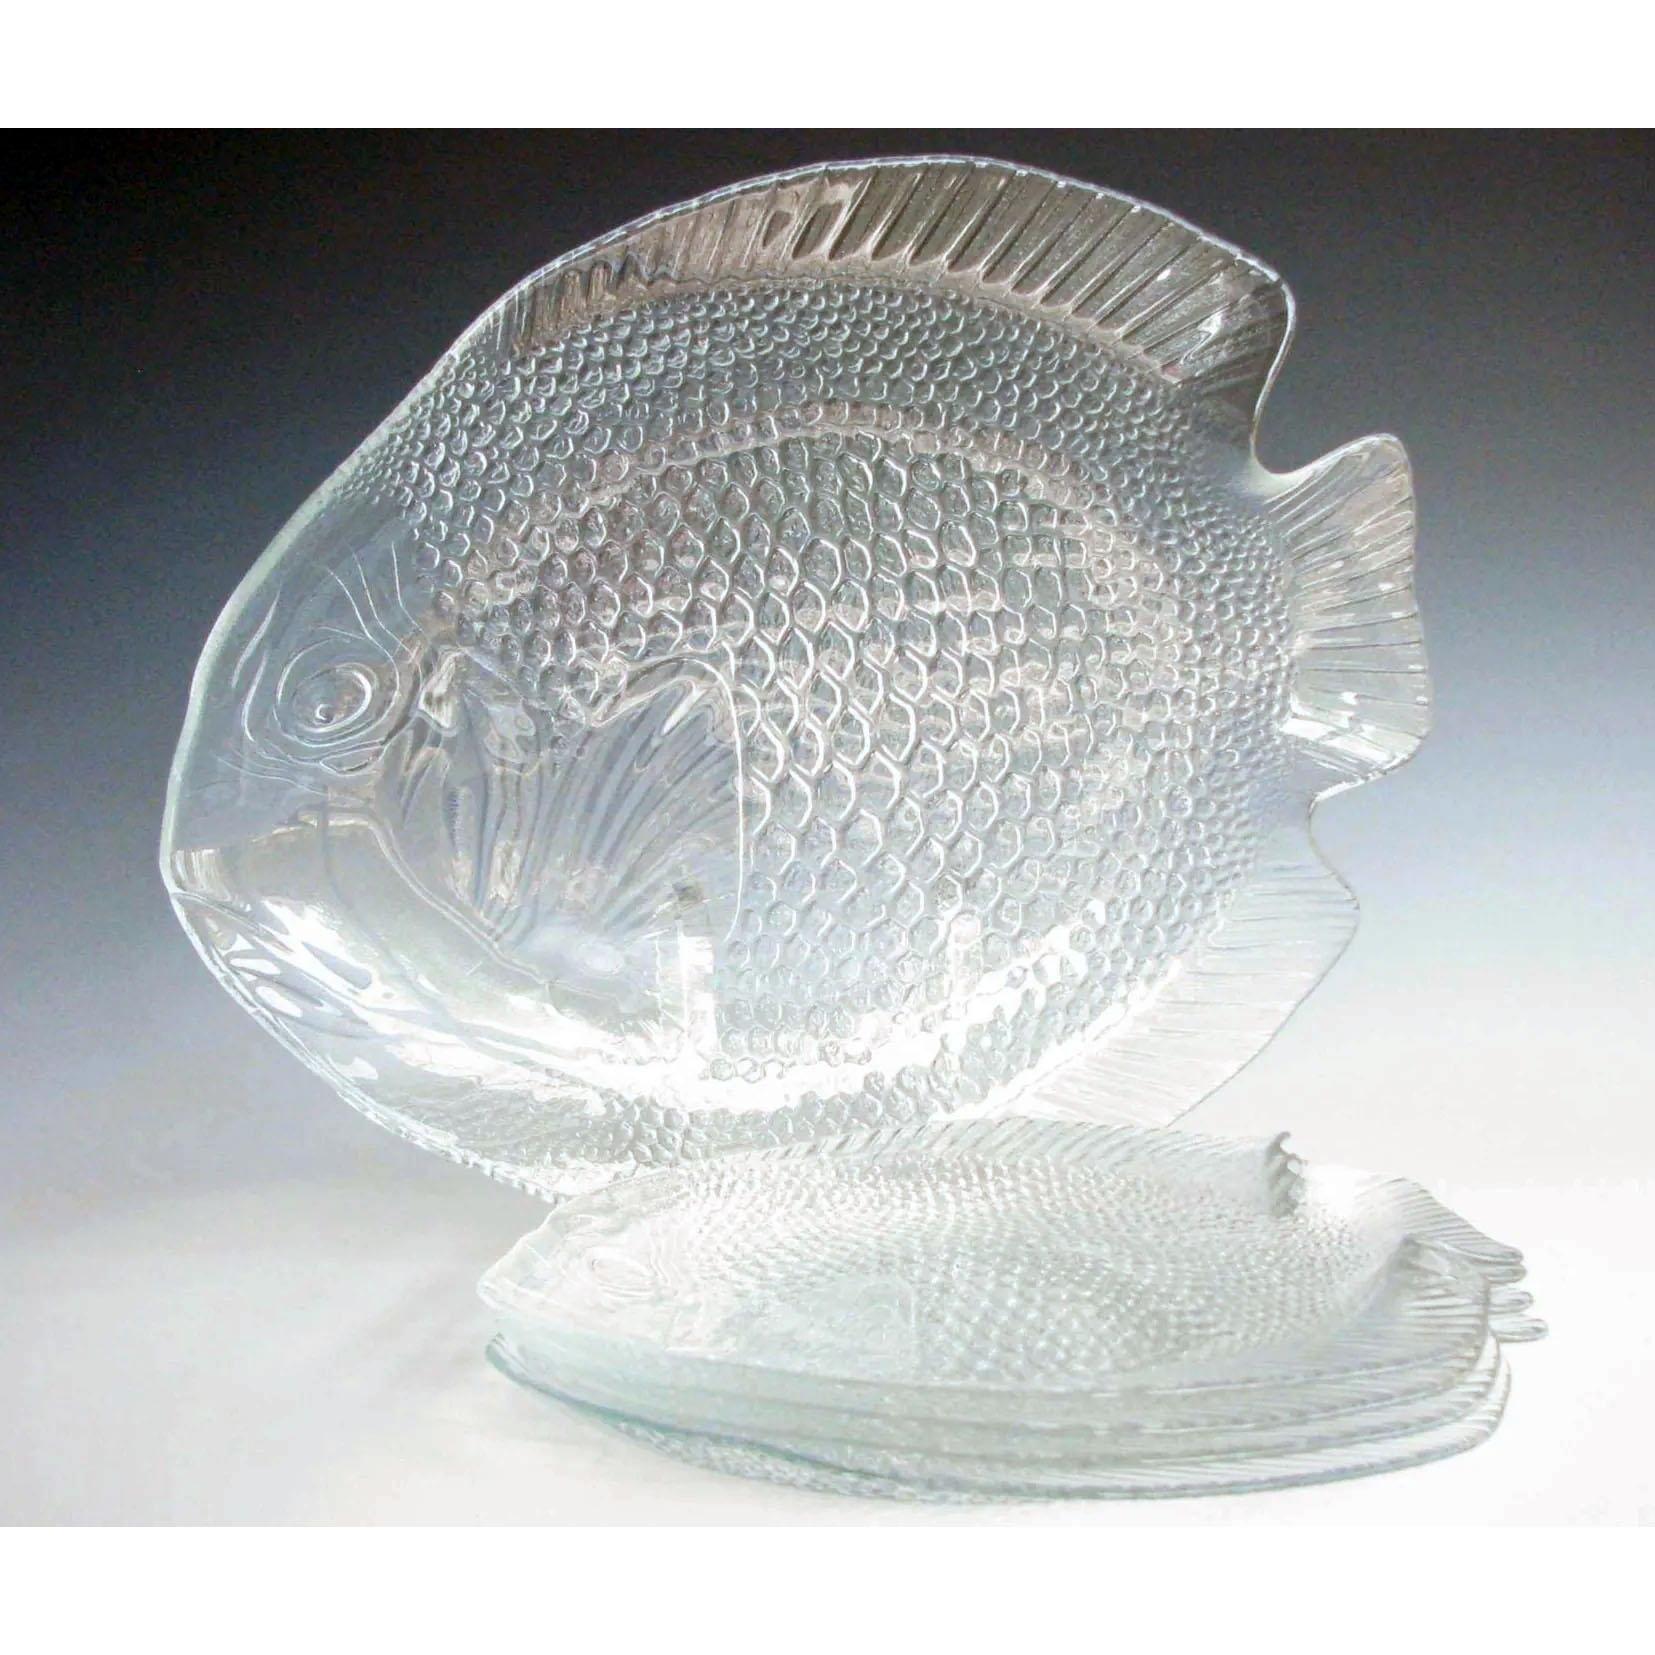 Arcoroc 'Poisson' Vintage Fish Design Plates & Platter. One platter and 4 Individual Plates. Made of tempered pressed glass, each marked Arcoroc France on the tail. In excellent used condition.
Dimensions:
1 pc Large Fish Platter 40 x 32 x 3 cm